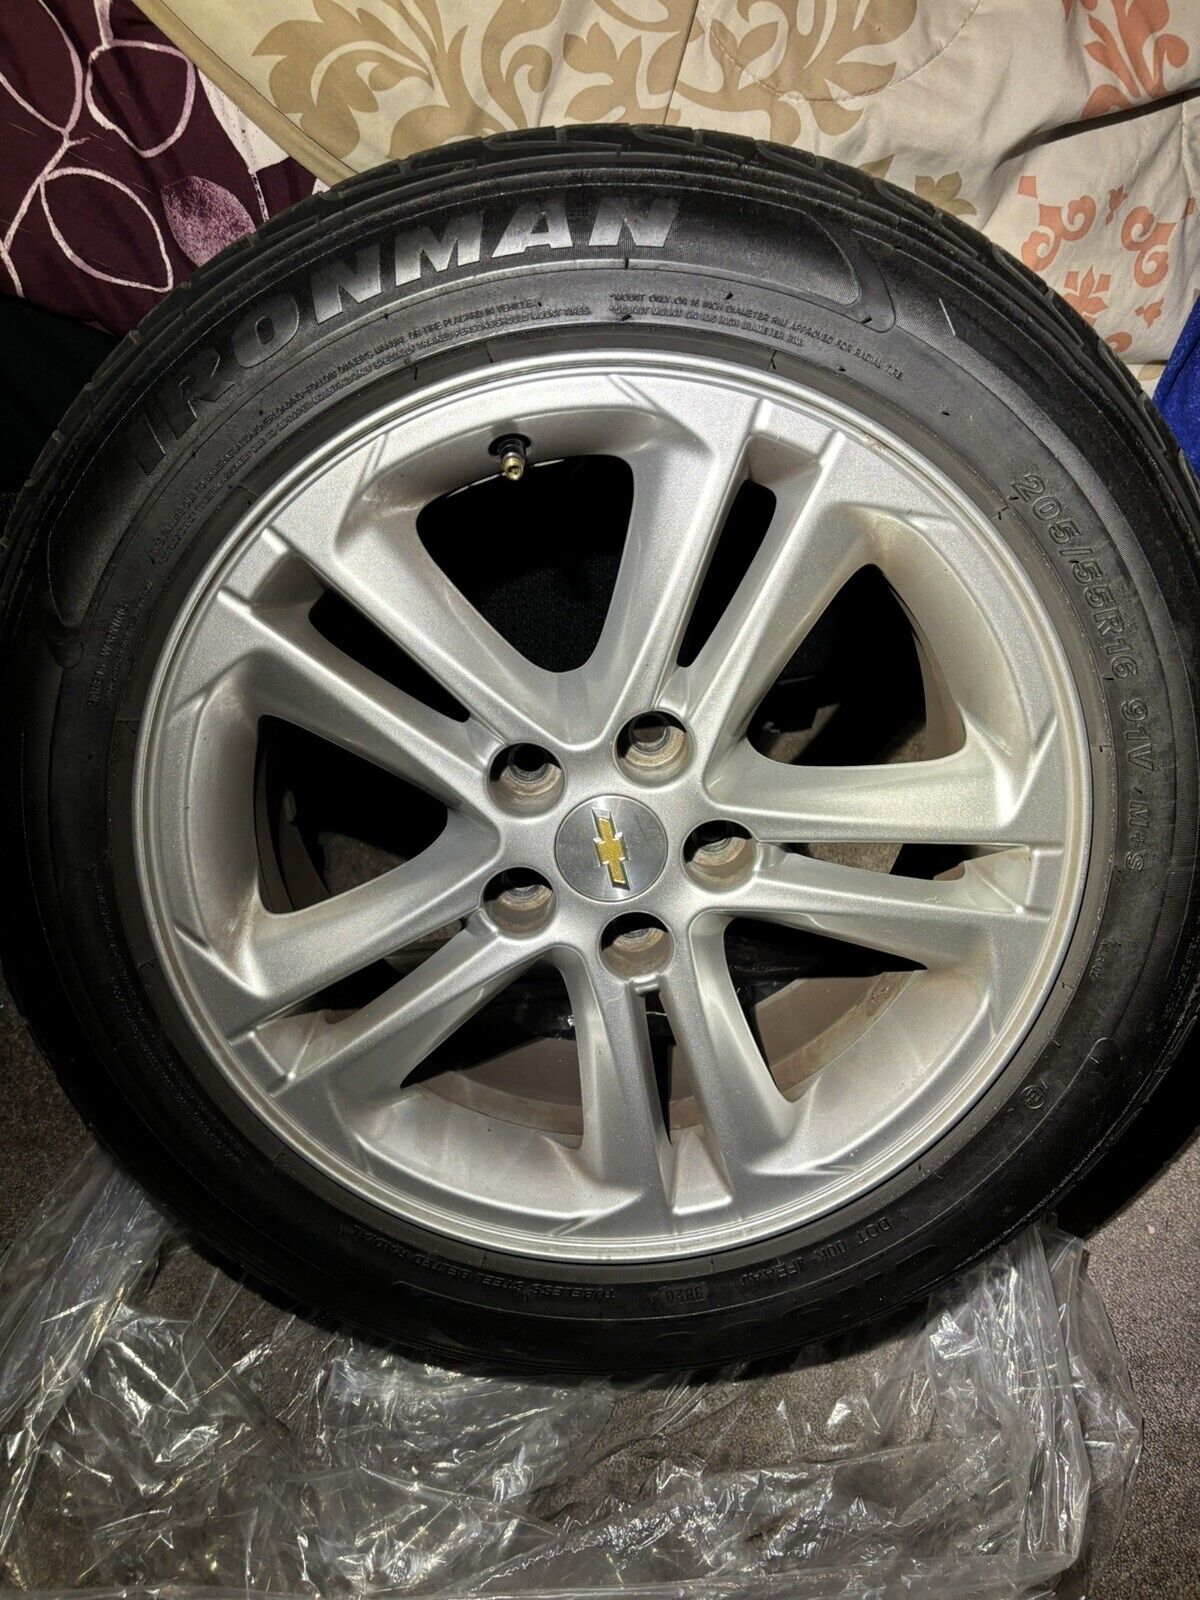 2017 Chevy Cruze 16” Wheel With Tires Two Still New Other Two Half Life 